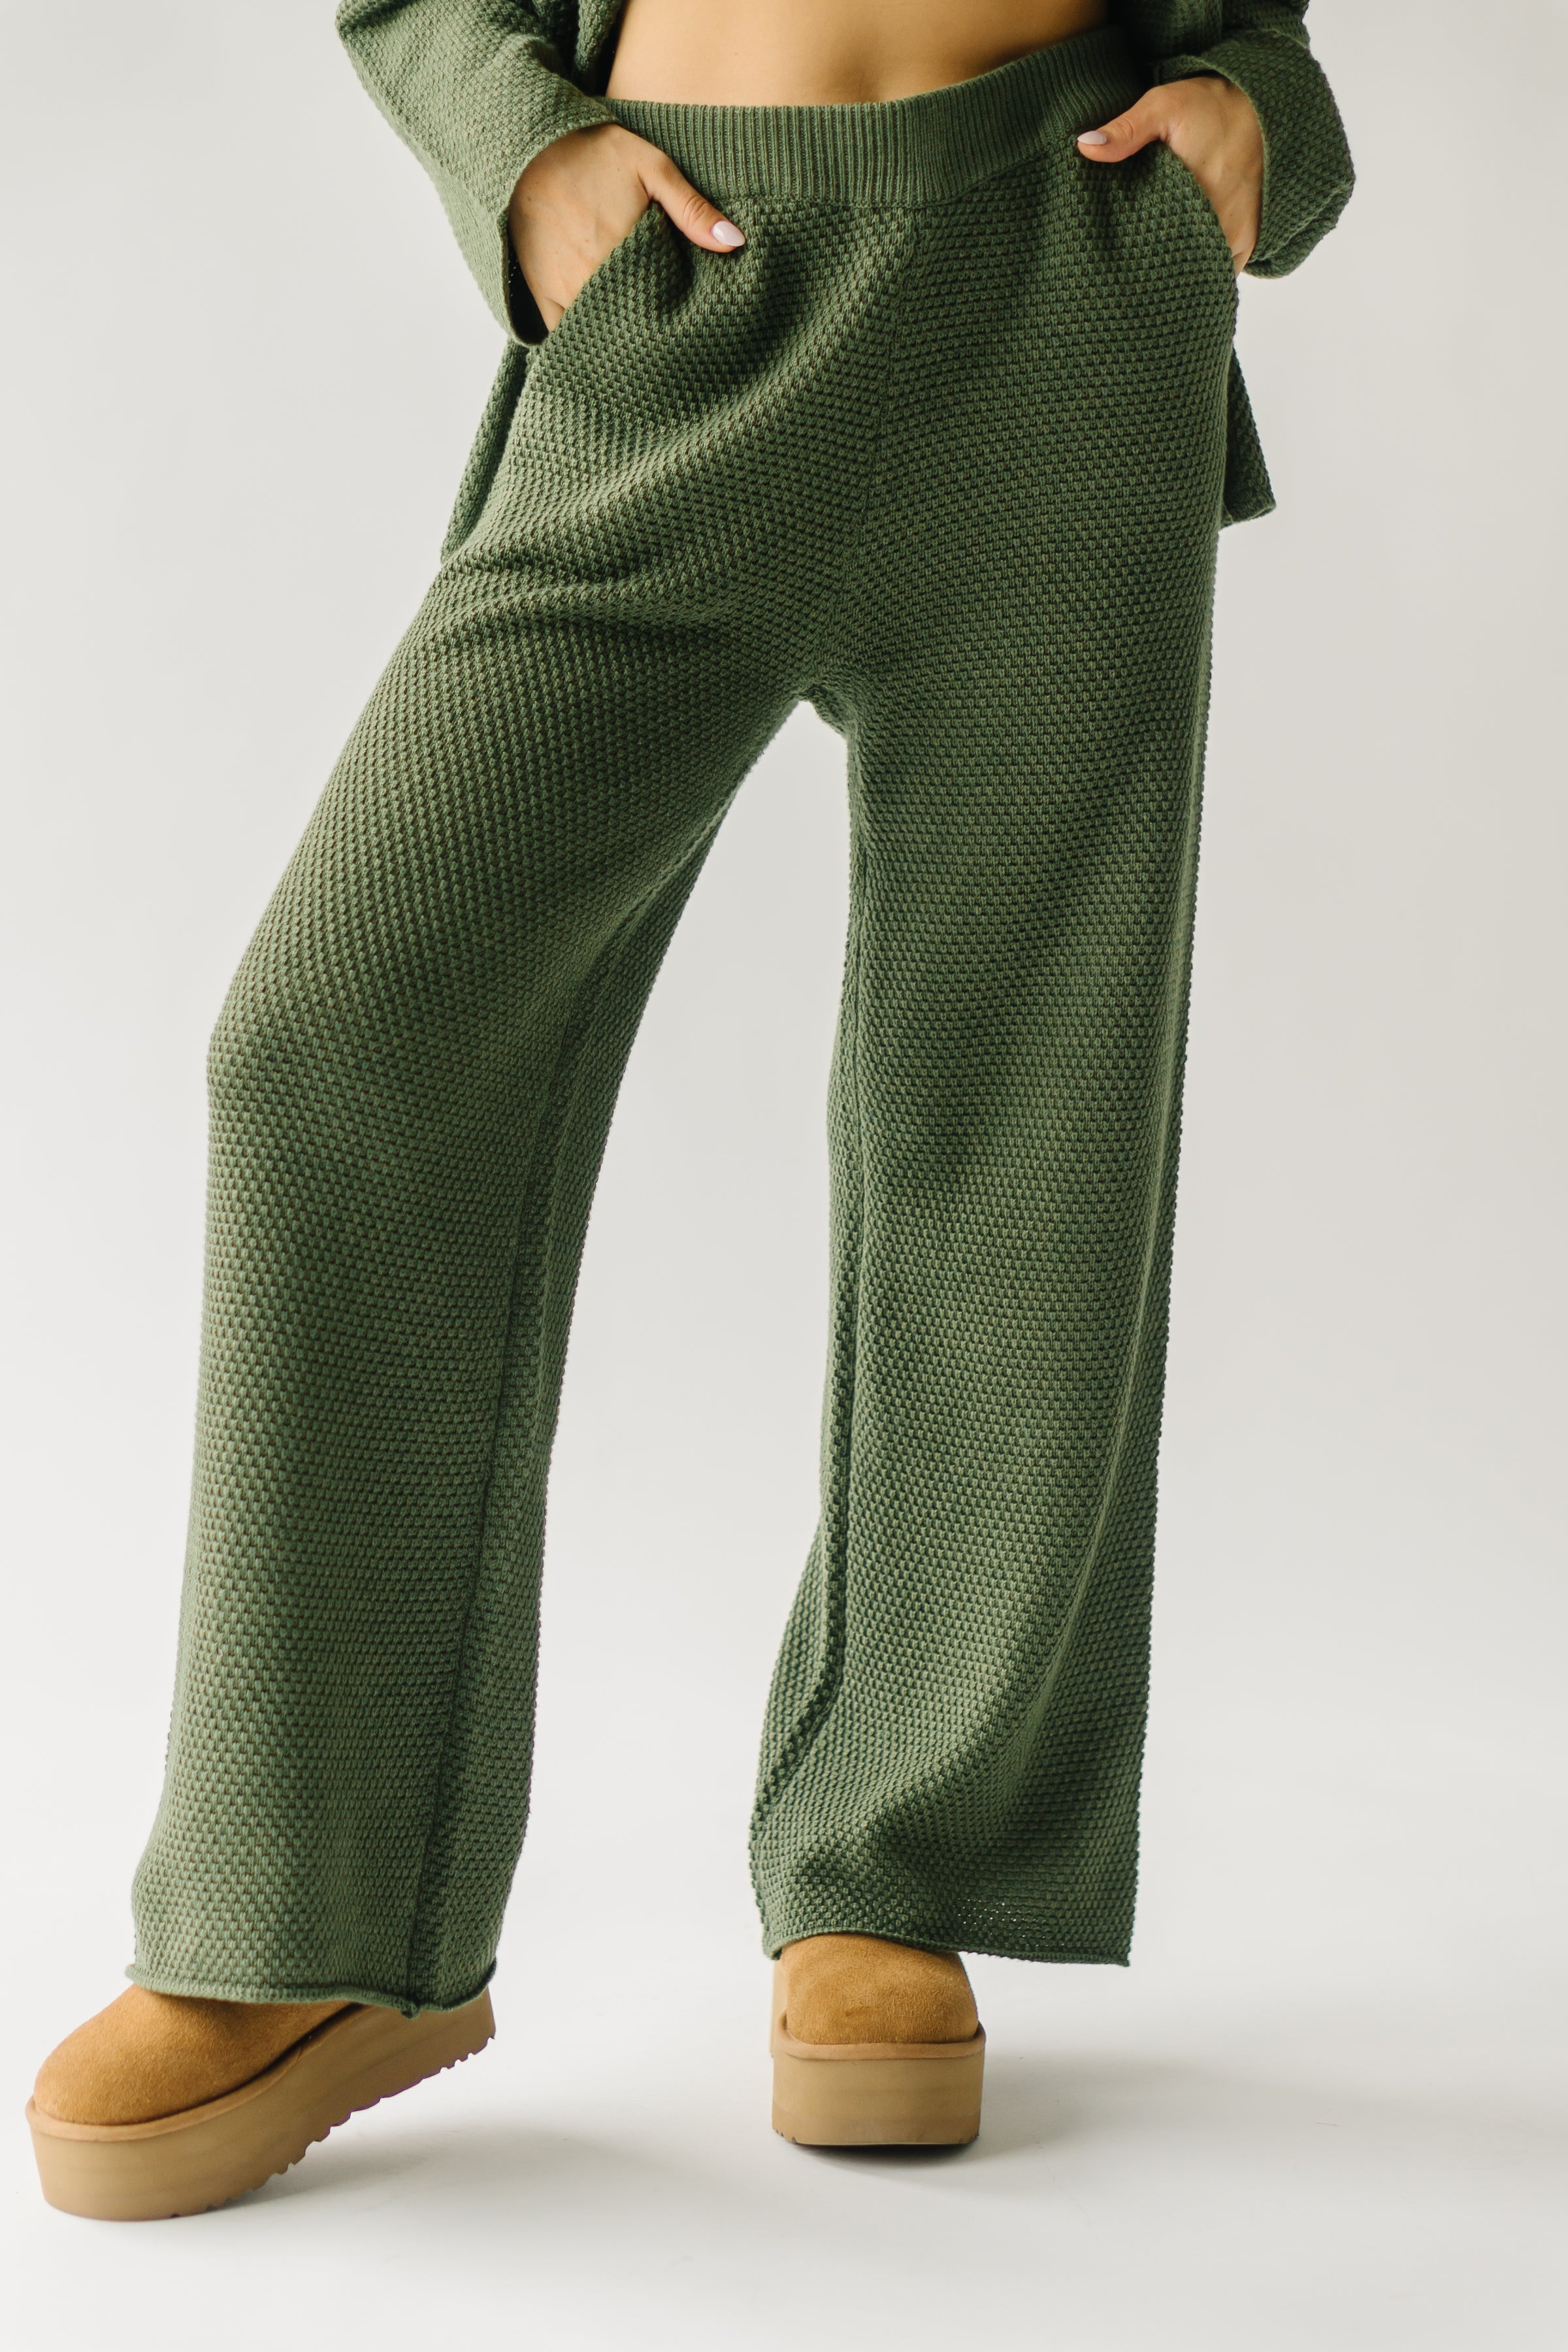 The Riker Wide Leg Sweater Pant in Olive – Piper & Scoot